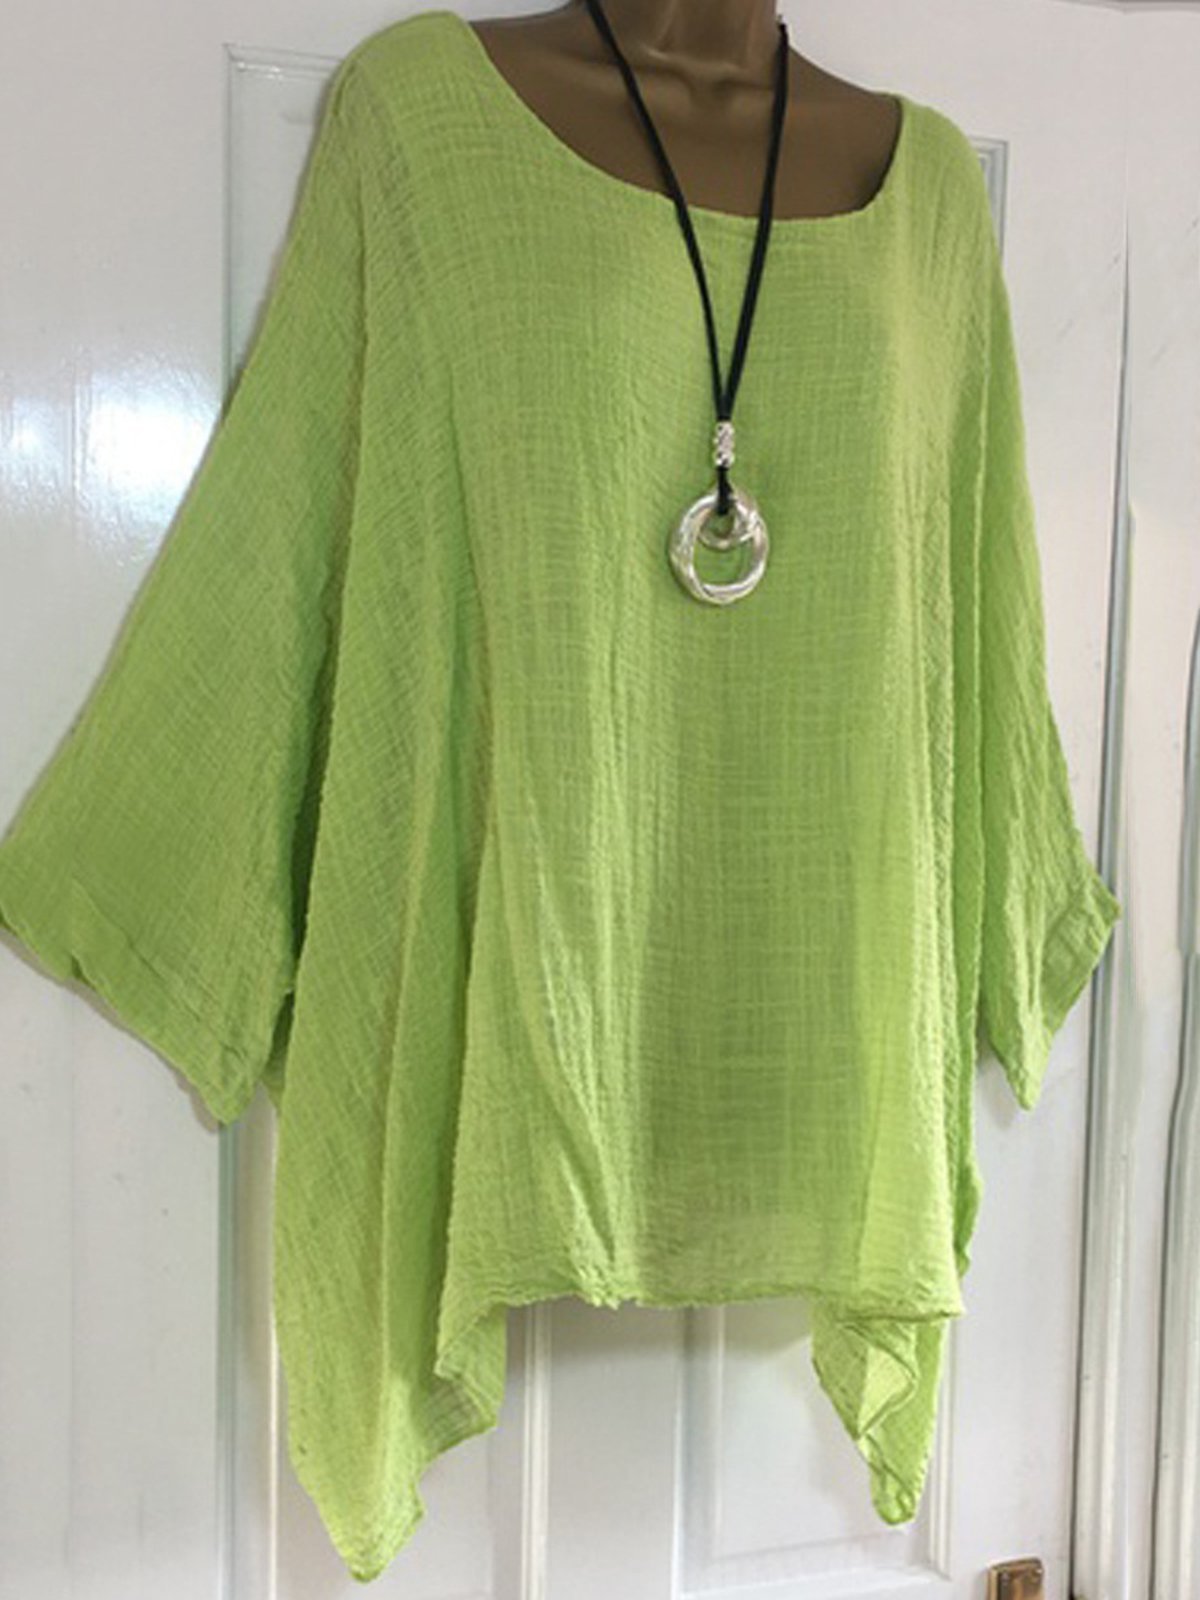 Cotton-Blend Casual Batwing Sleeve Loose Blouses